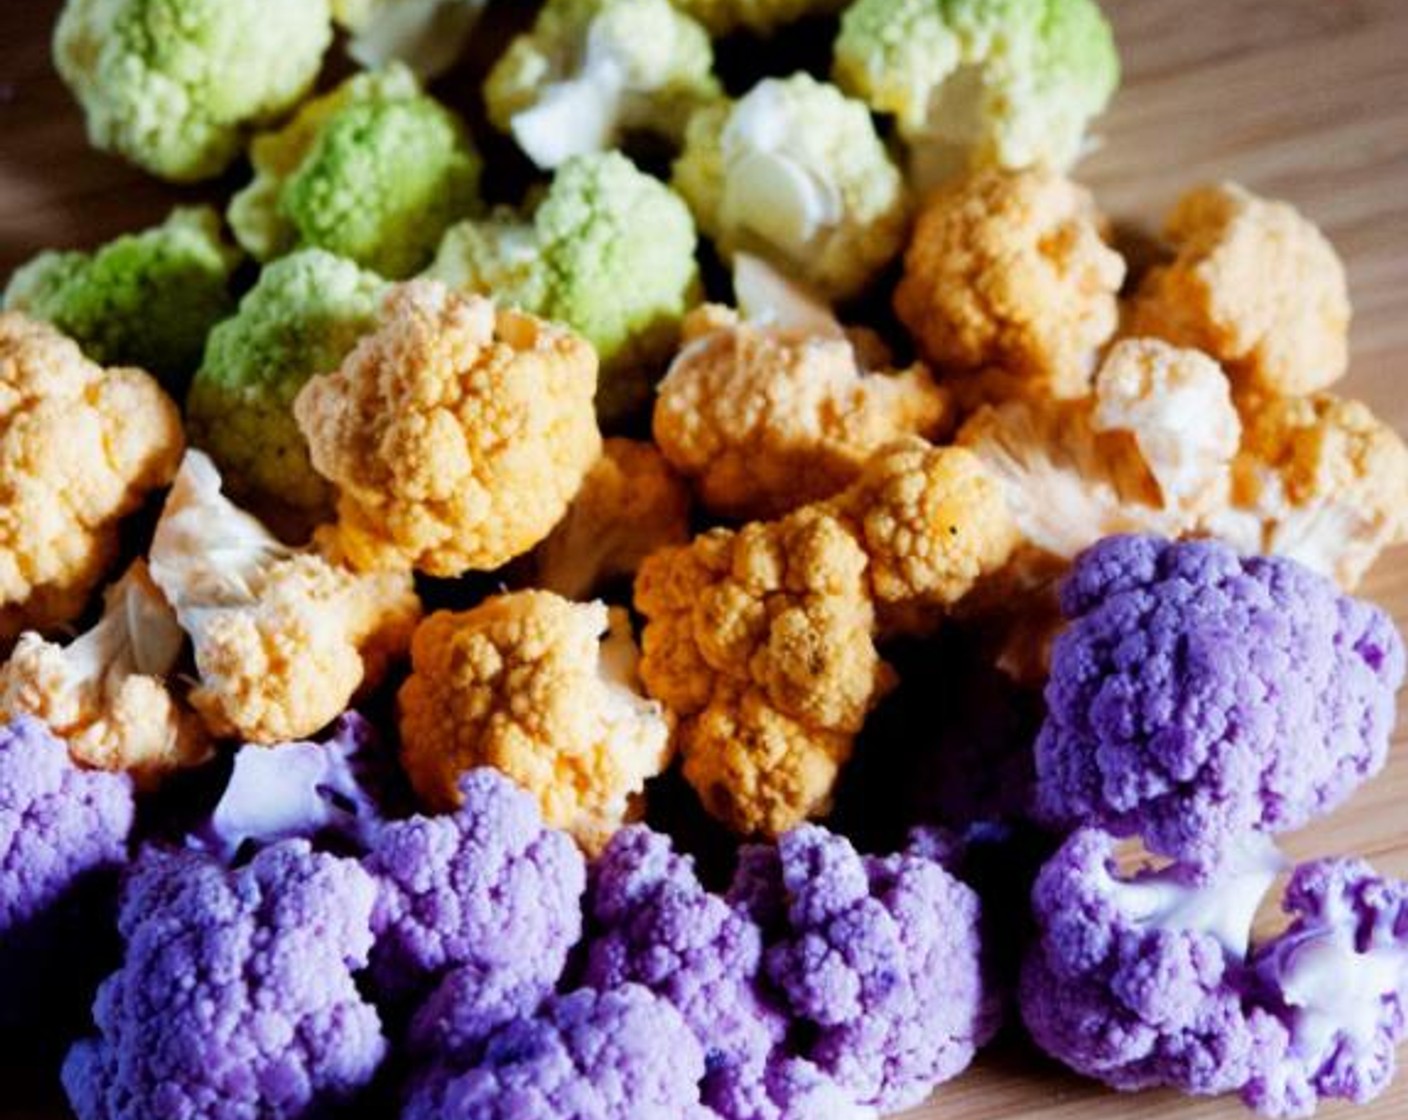 step 1 Start by cutting up the Green Cauliflower (1 head), Orange Cauliflower (1 head), and Purple Cauliflower (1 head) into florets and washing them under running water.